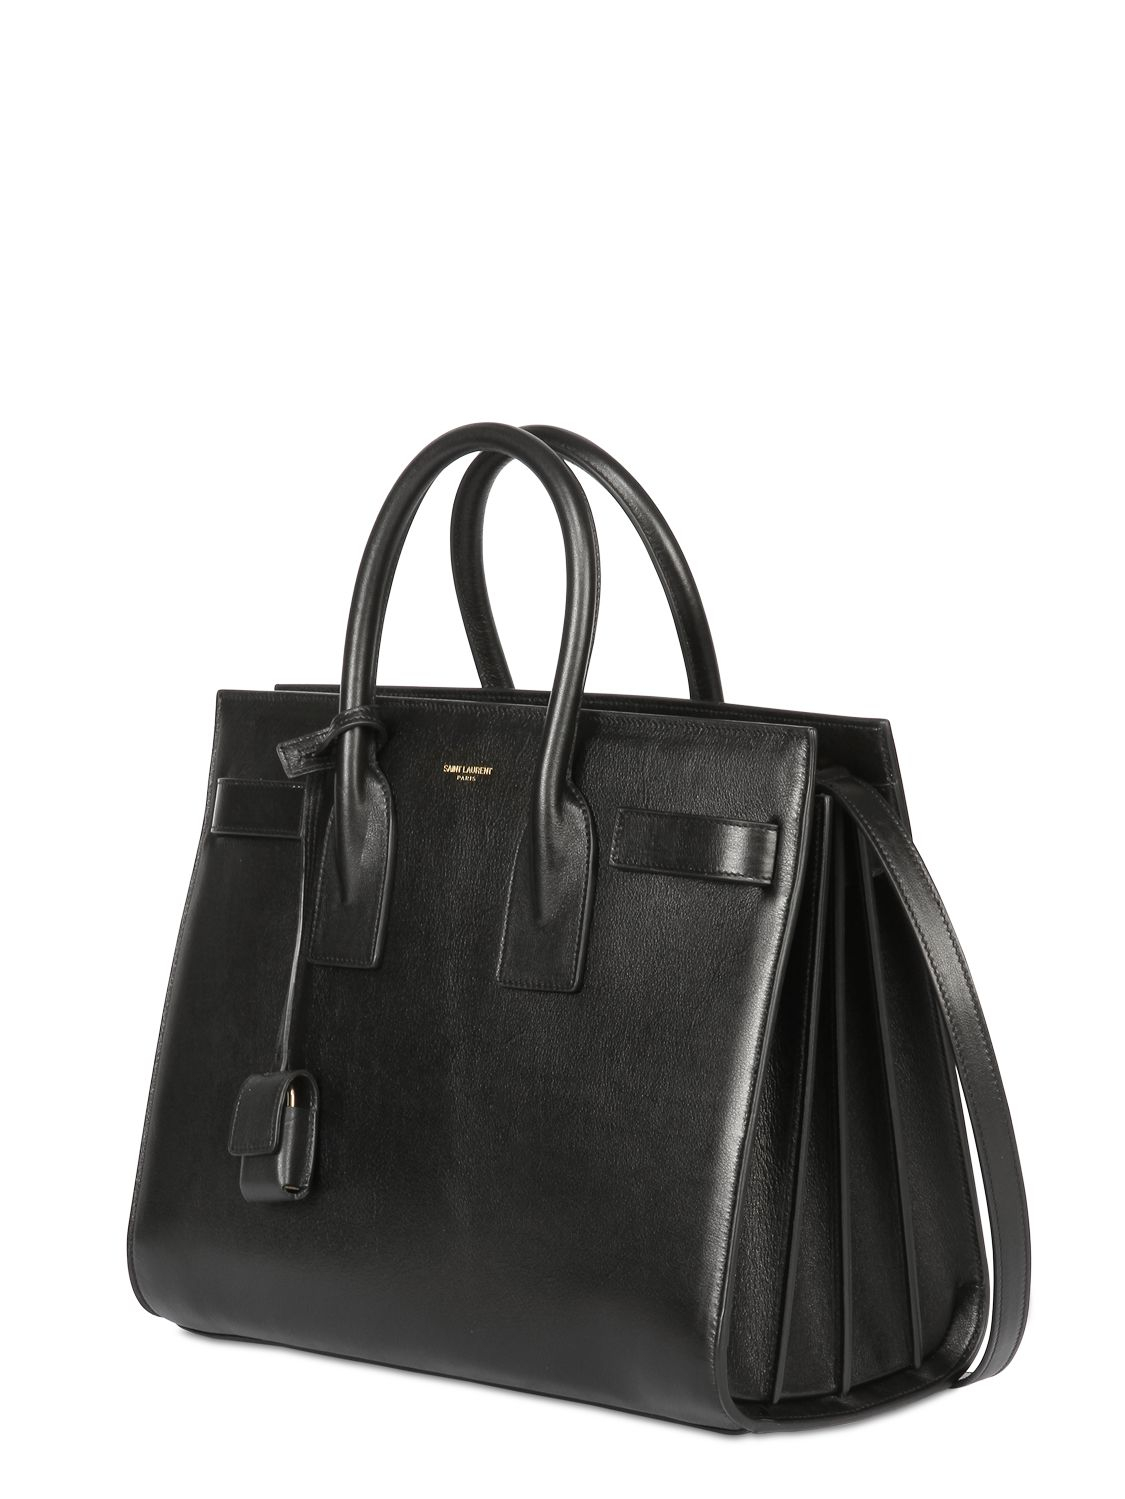 classic small sac de jour bag in black suede and leather